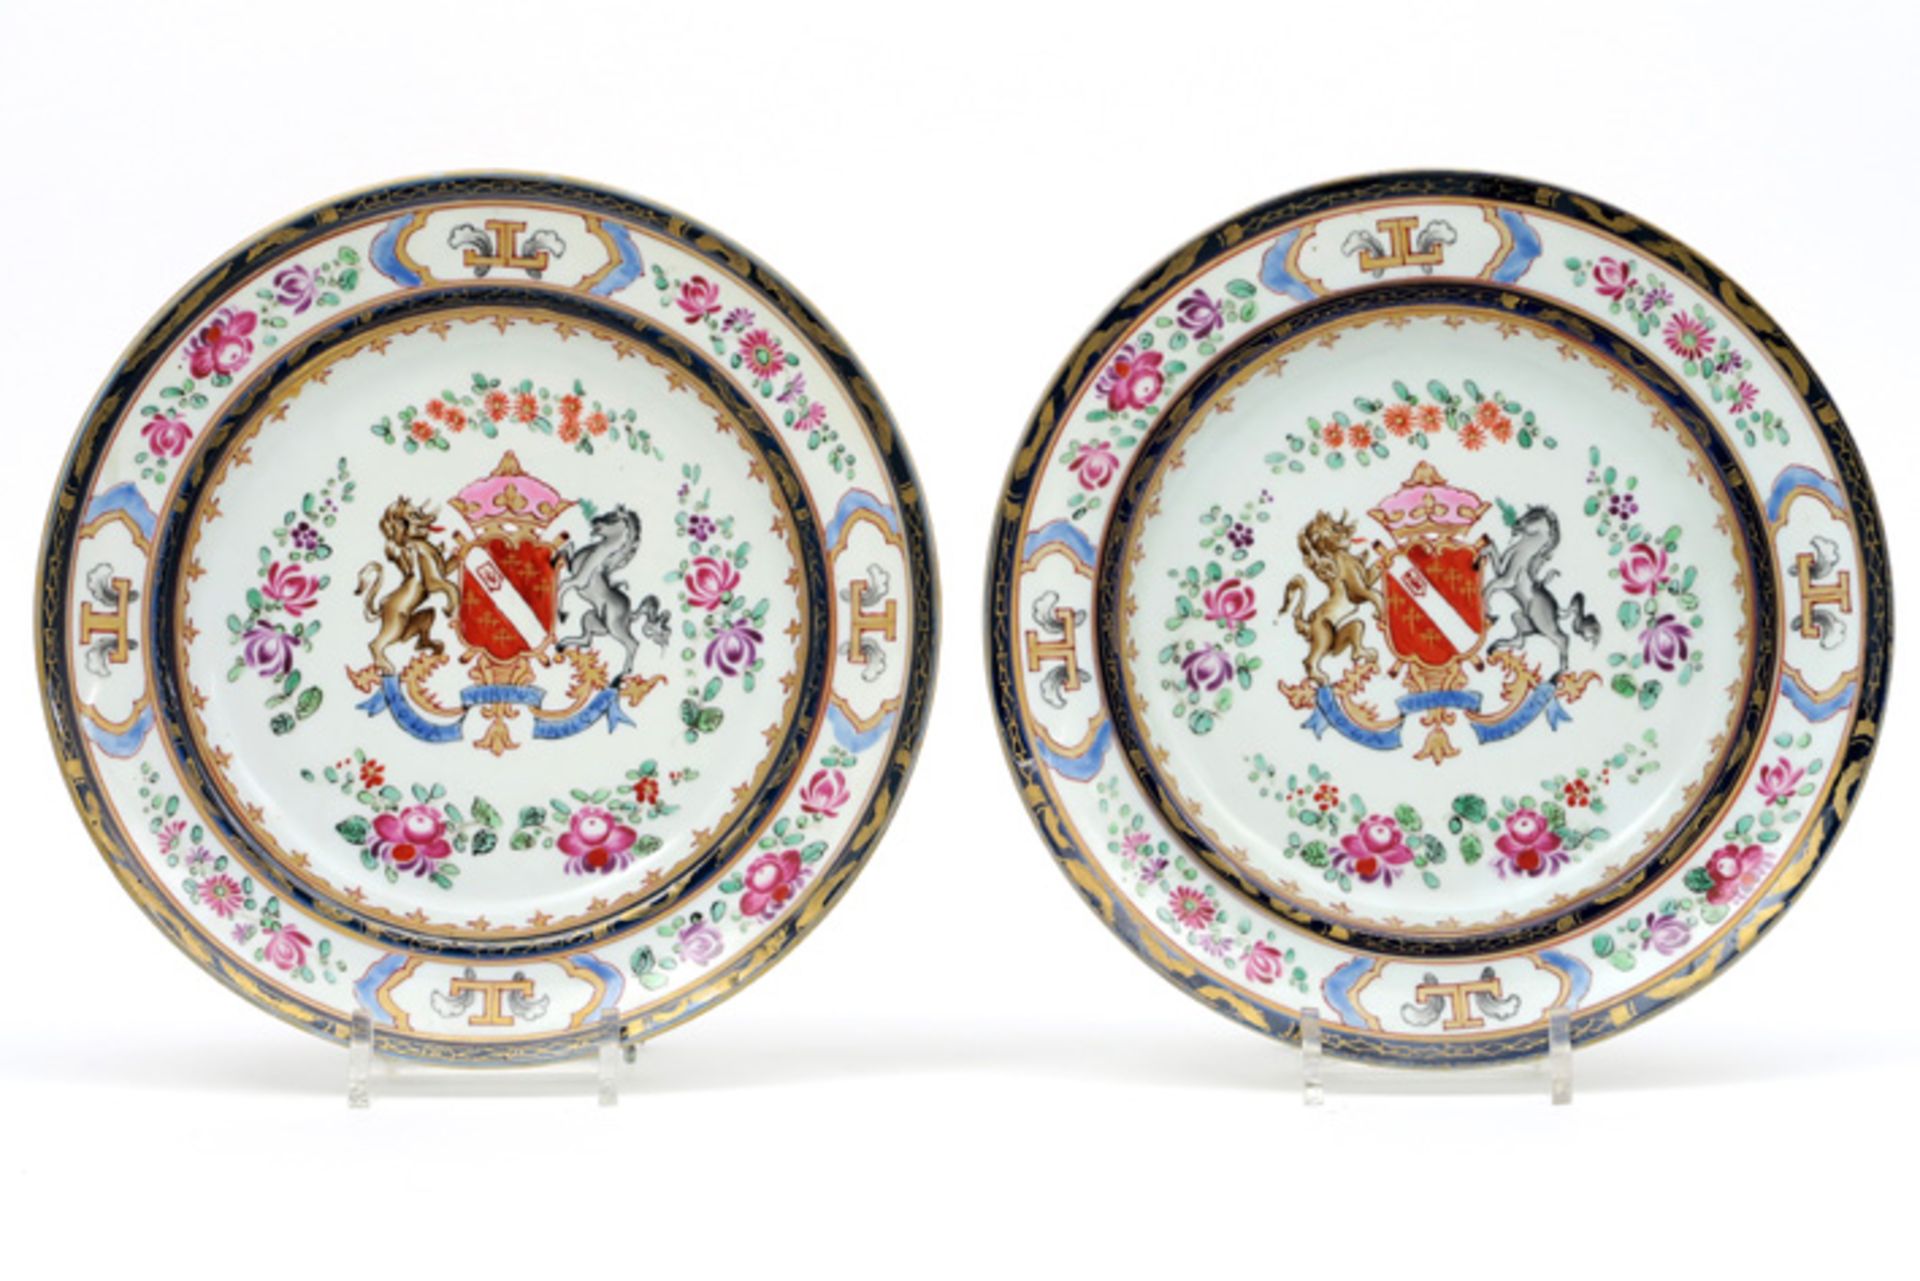 pair of antique plates in porcelain with a polychrome family crest decor || Paar antieke borden in